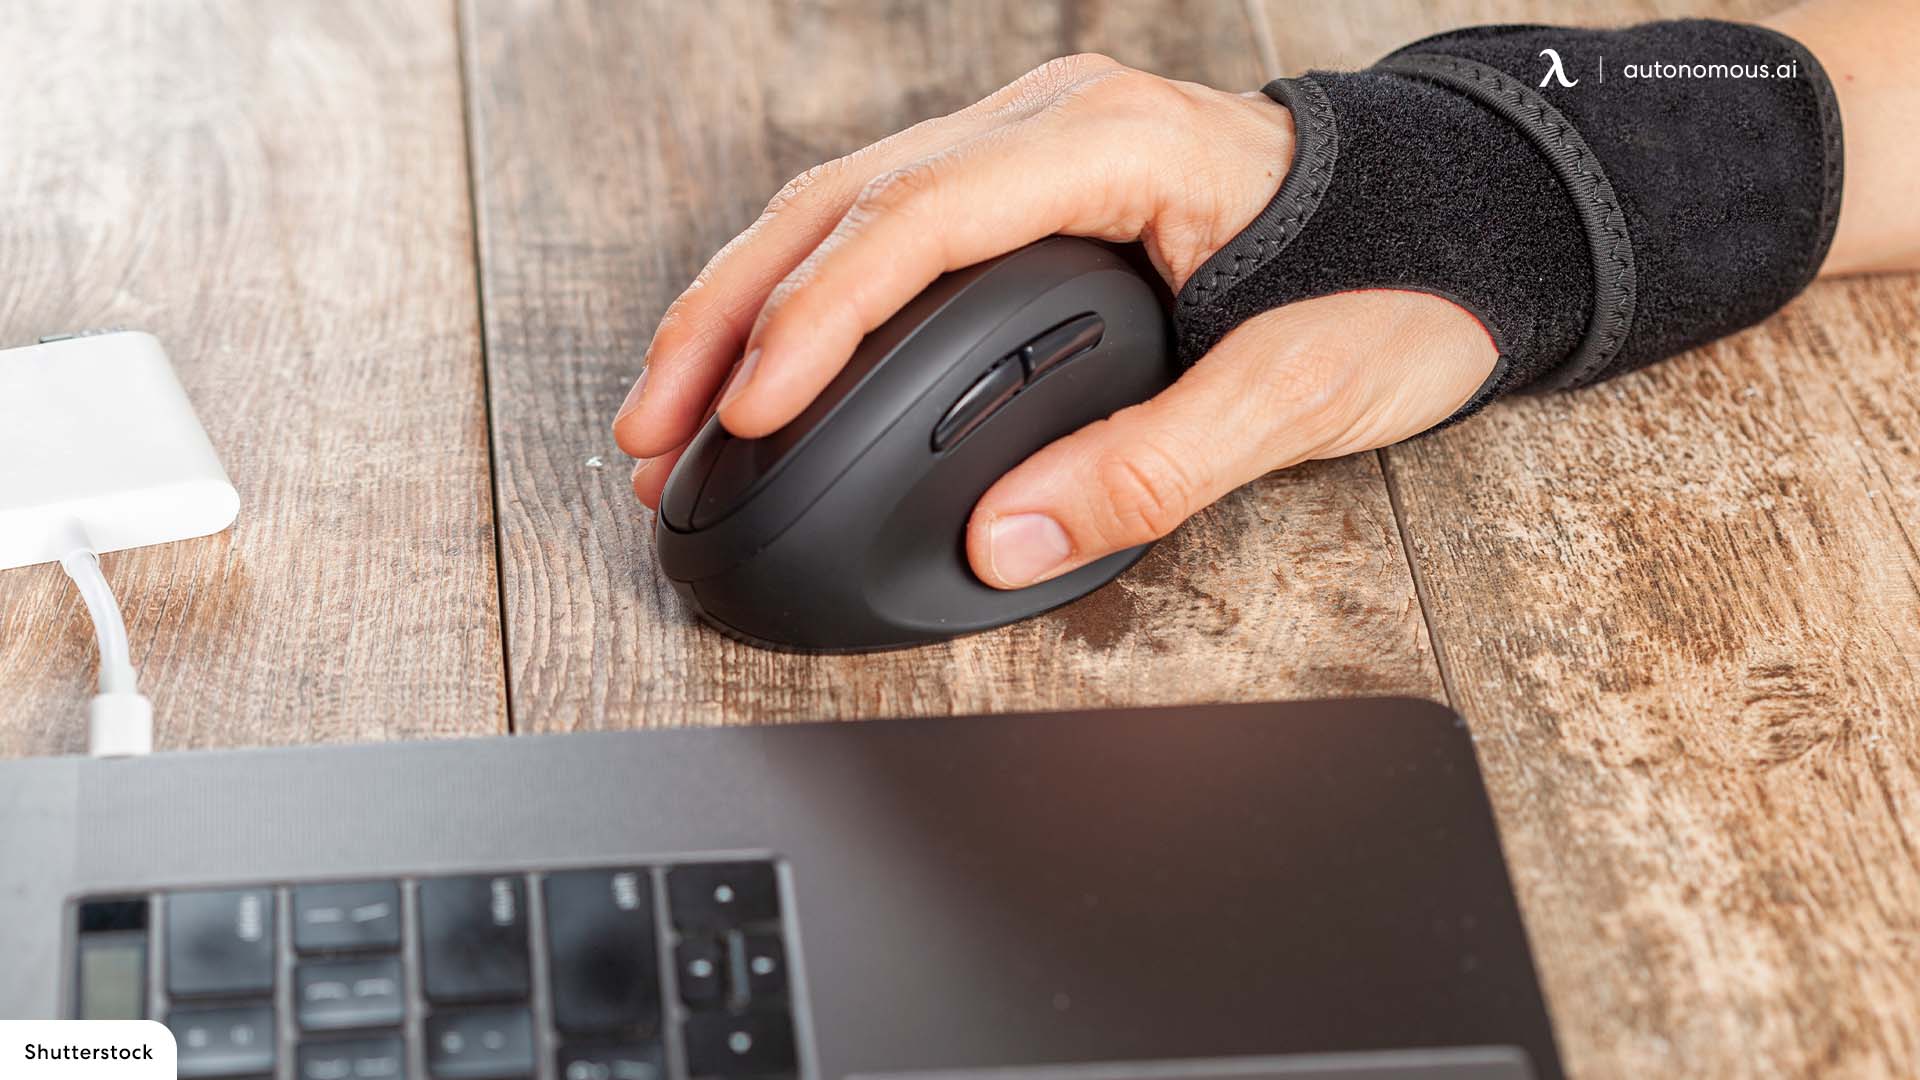 How to Relieve Wrist Pain From Mouse